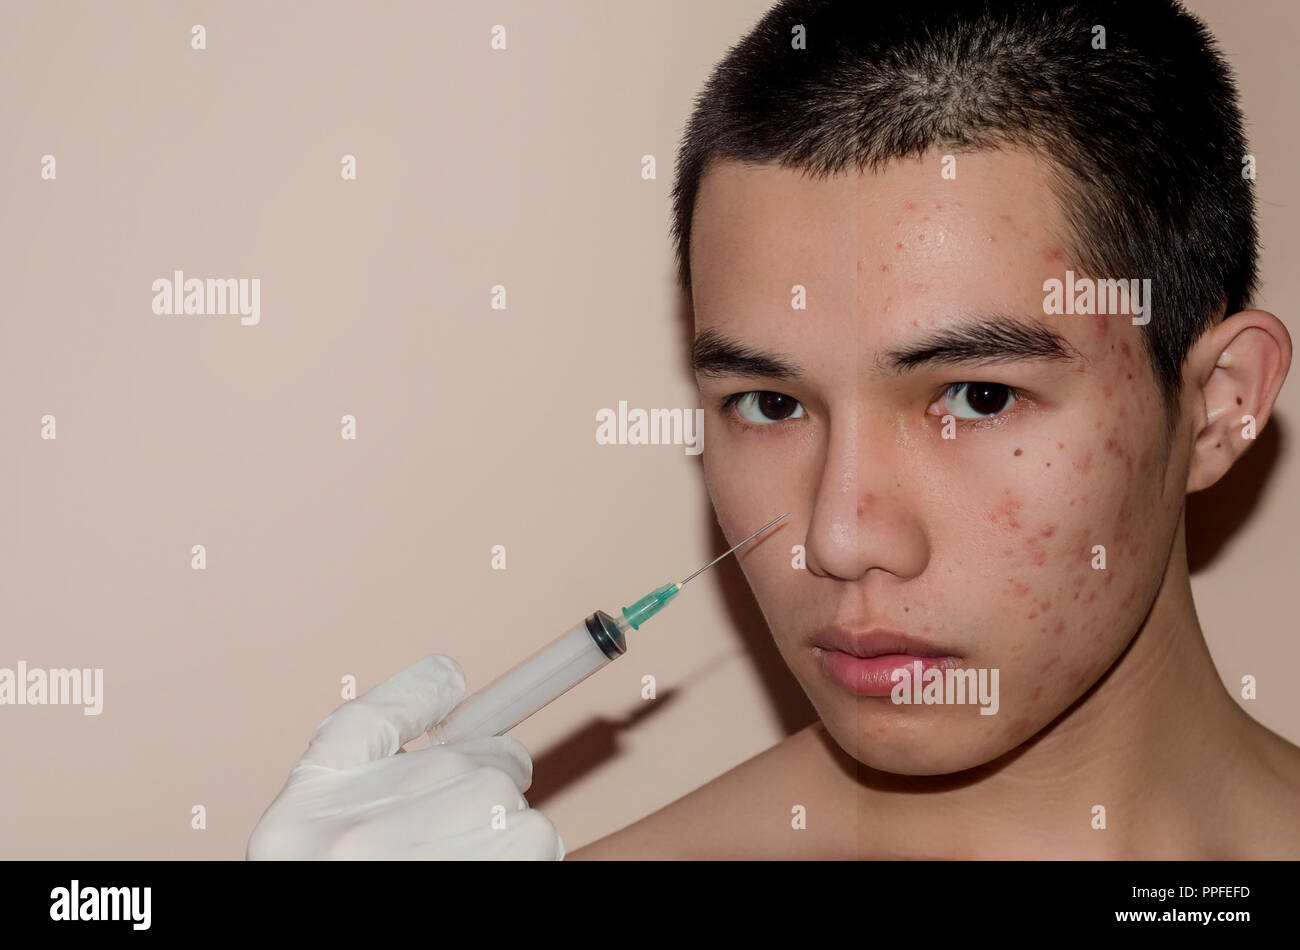 Young man with before and after treatment from acne and pimple, Before and after of face skin treat by scars and wrinkle by acne removal. Spots skin b Stock Photo